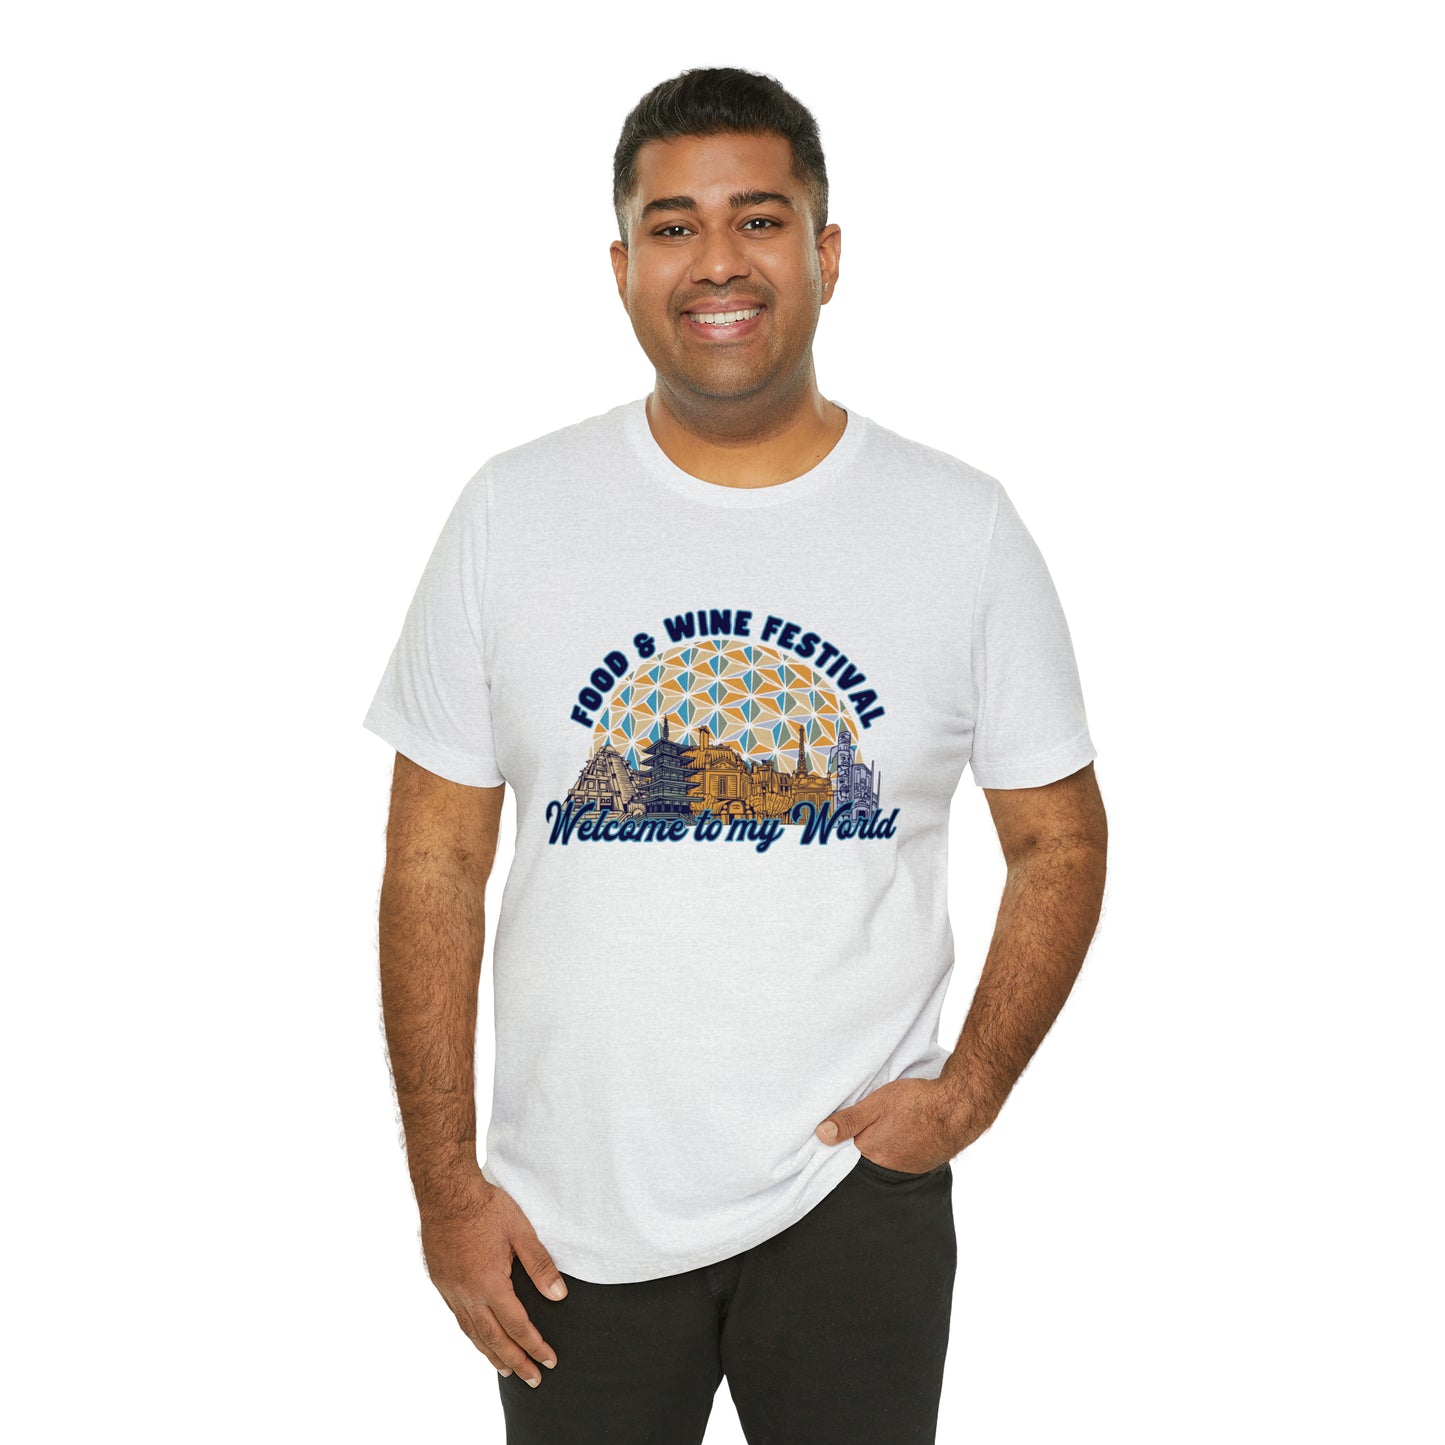 Welcome to my World EPCOT Food & Wine Festival - Adult Unisex